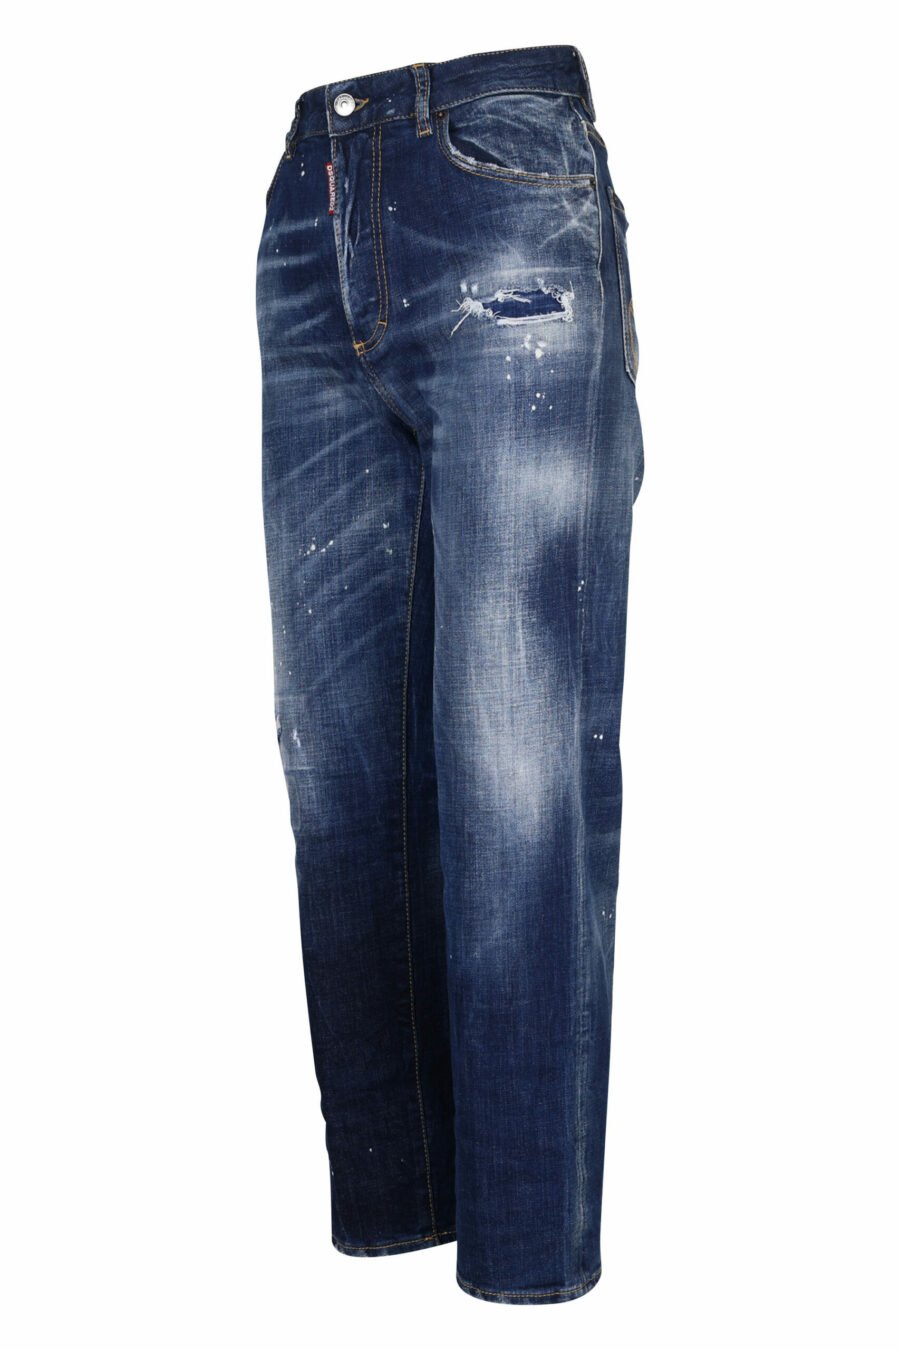 Blue "boston jean" jeans with rips - 8054148122256 1 scaled